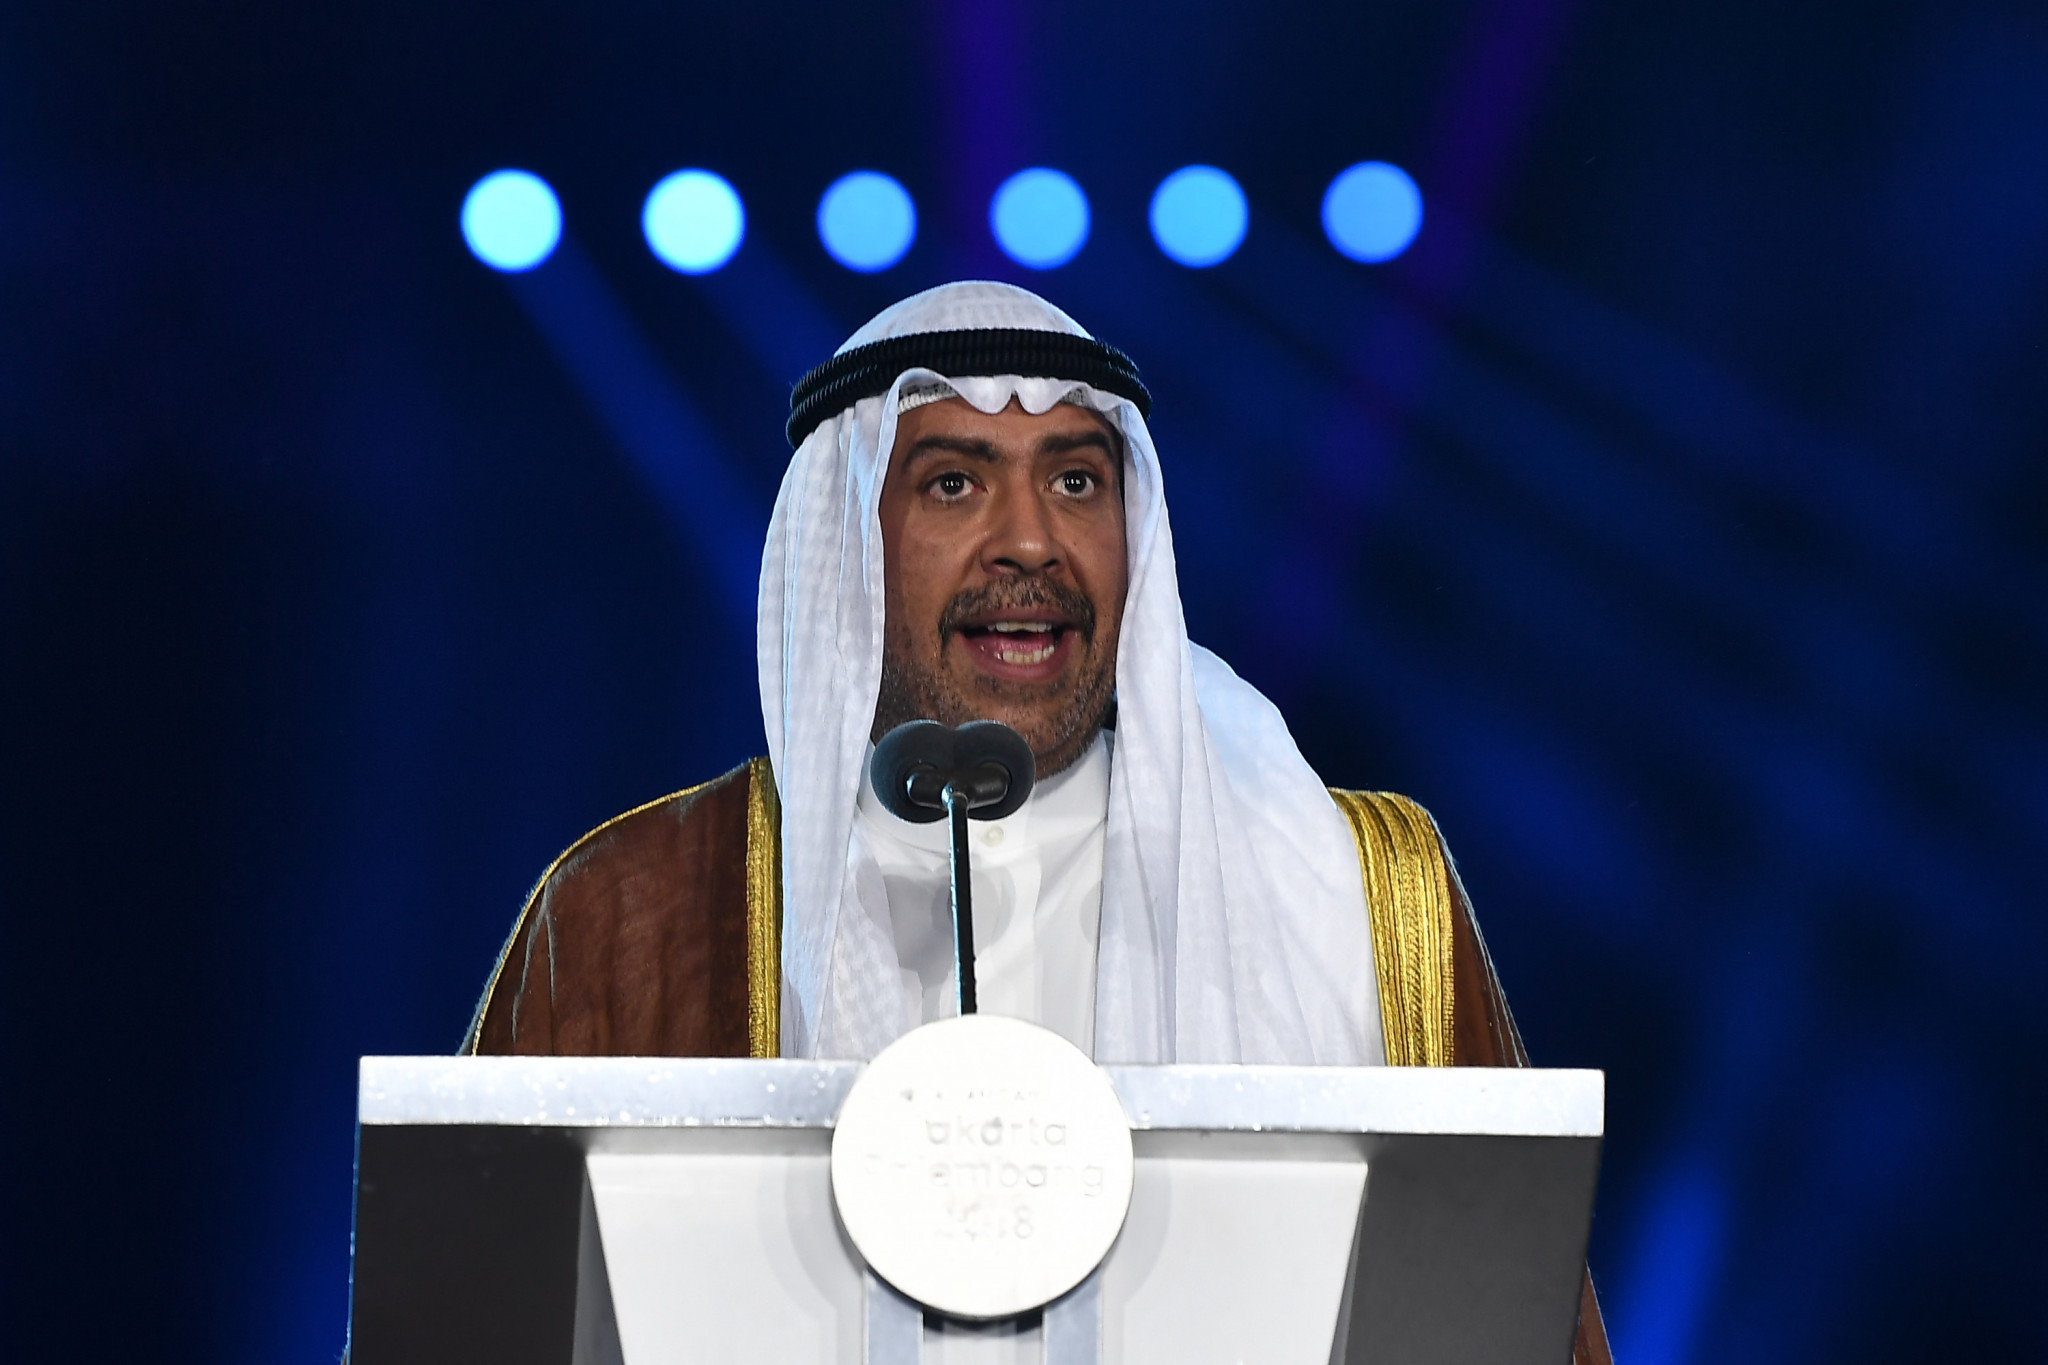 ANOC President Sheikh Ahmad Al-Fahad Al-Sabah claimed the establishment of the Ethics Commission by the organisation demonstrated good governance ©Getty Images